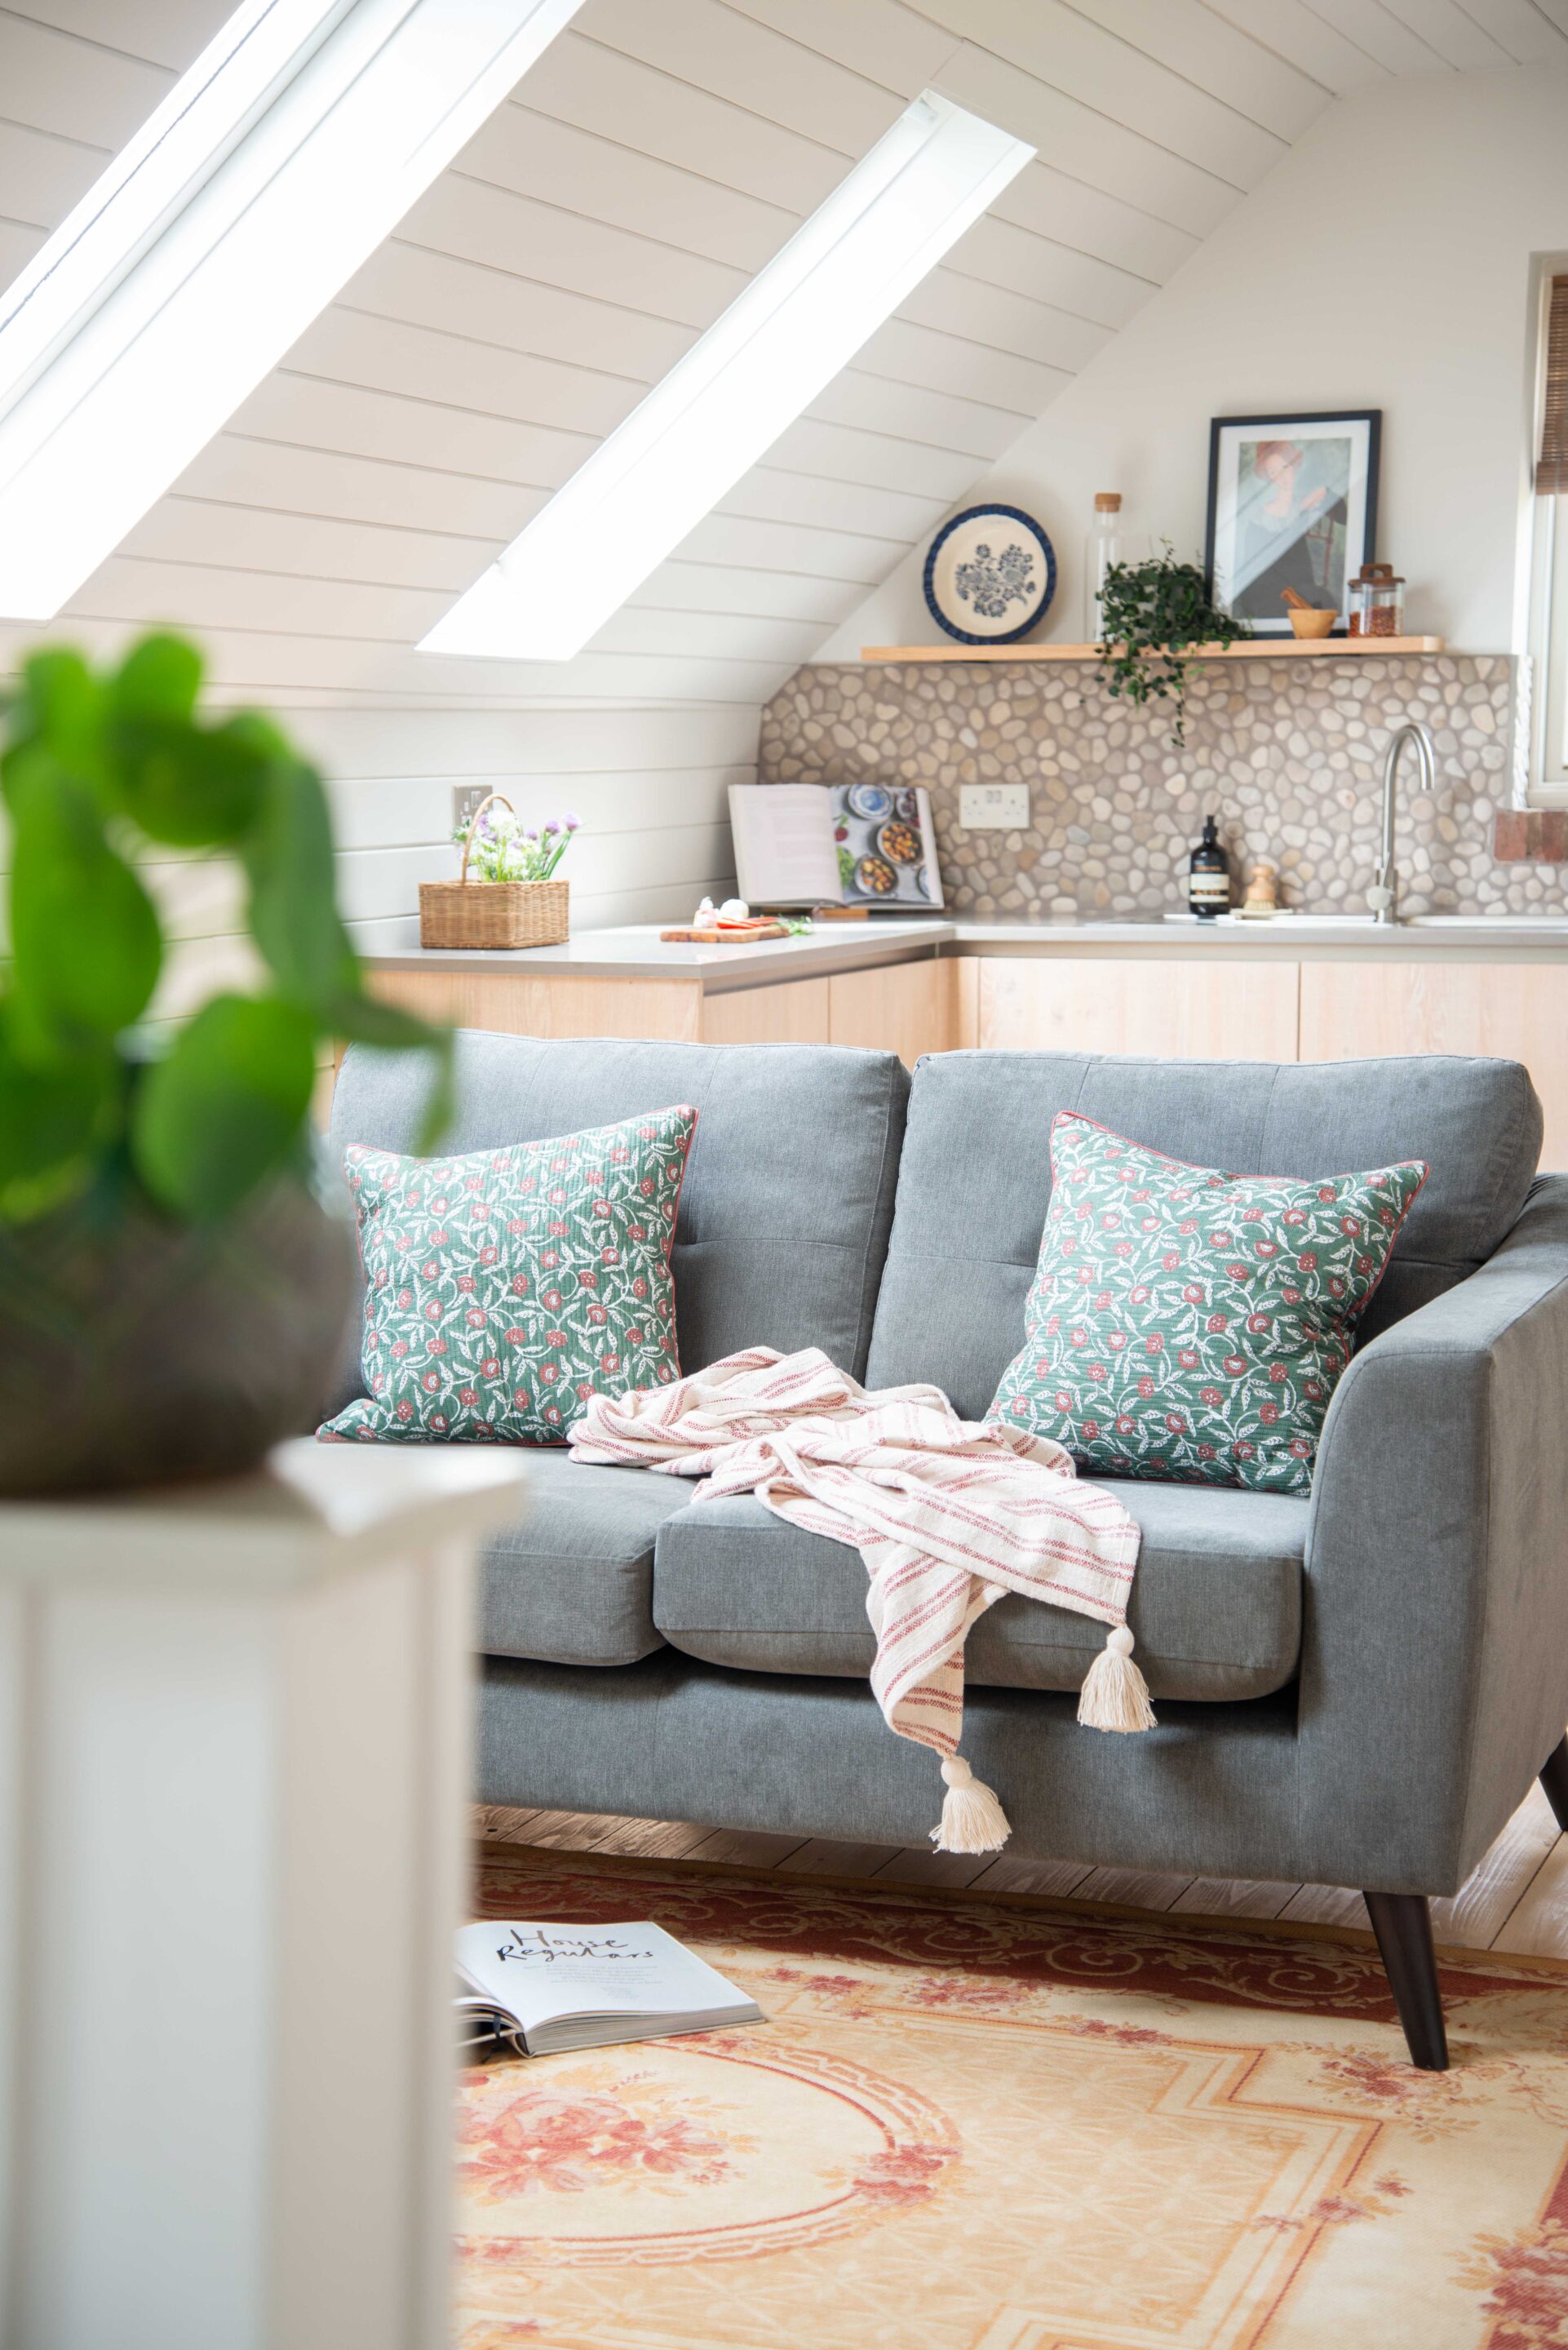 A view into the kitchen of a loft studio, across a small sofa with pink and green cushions.